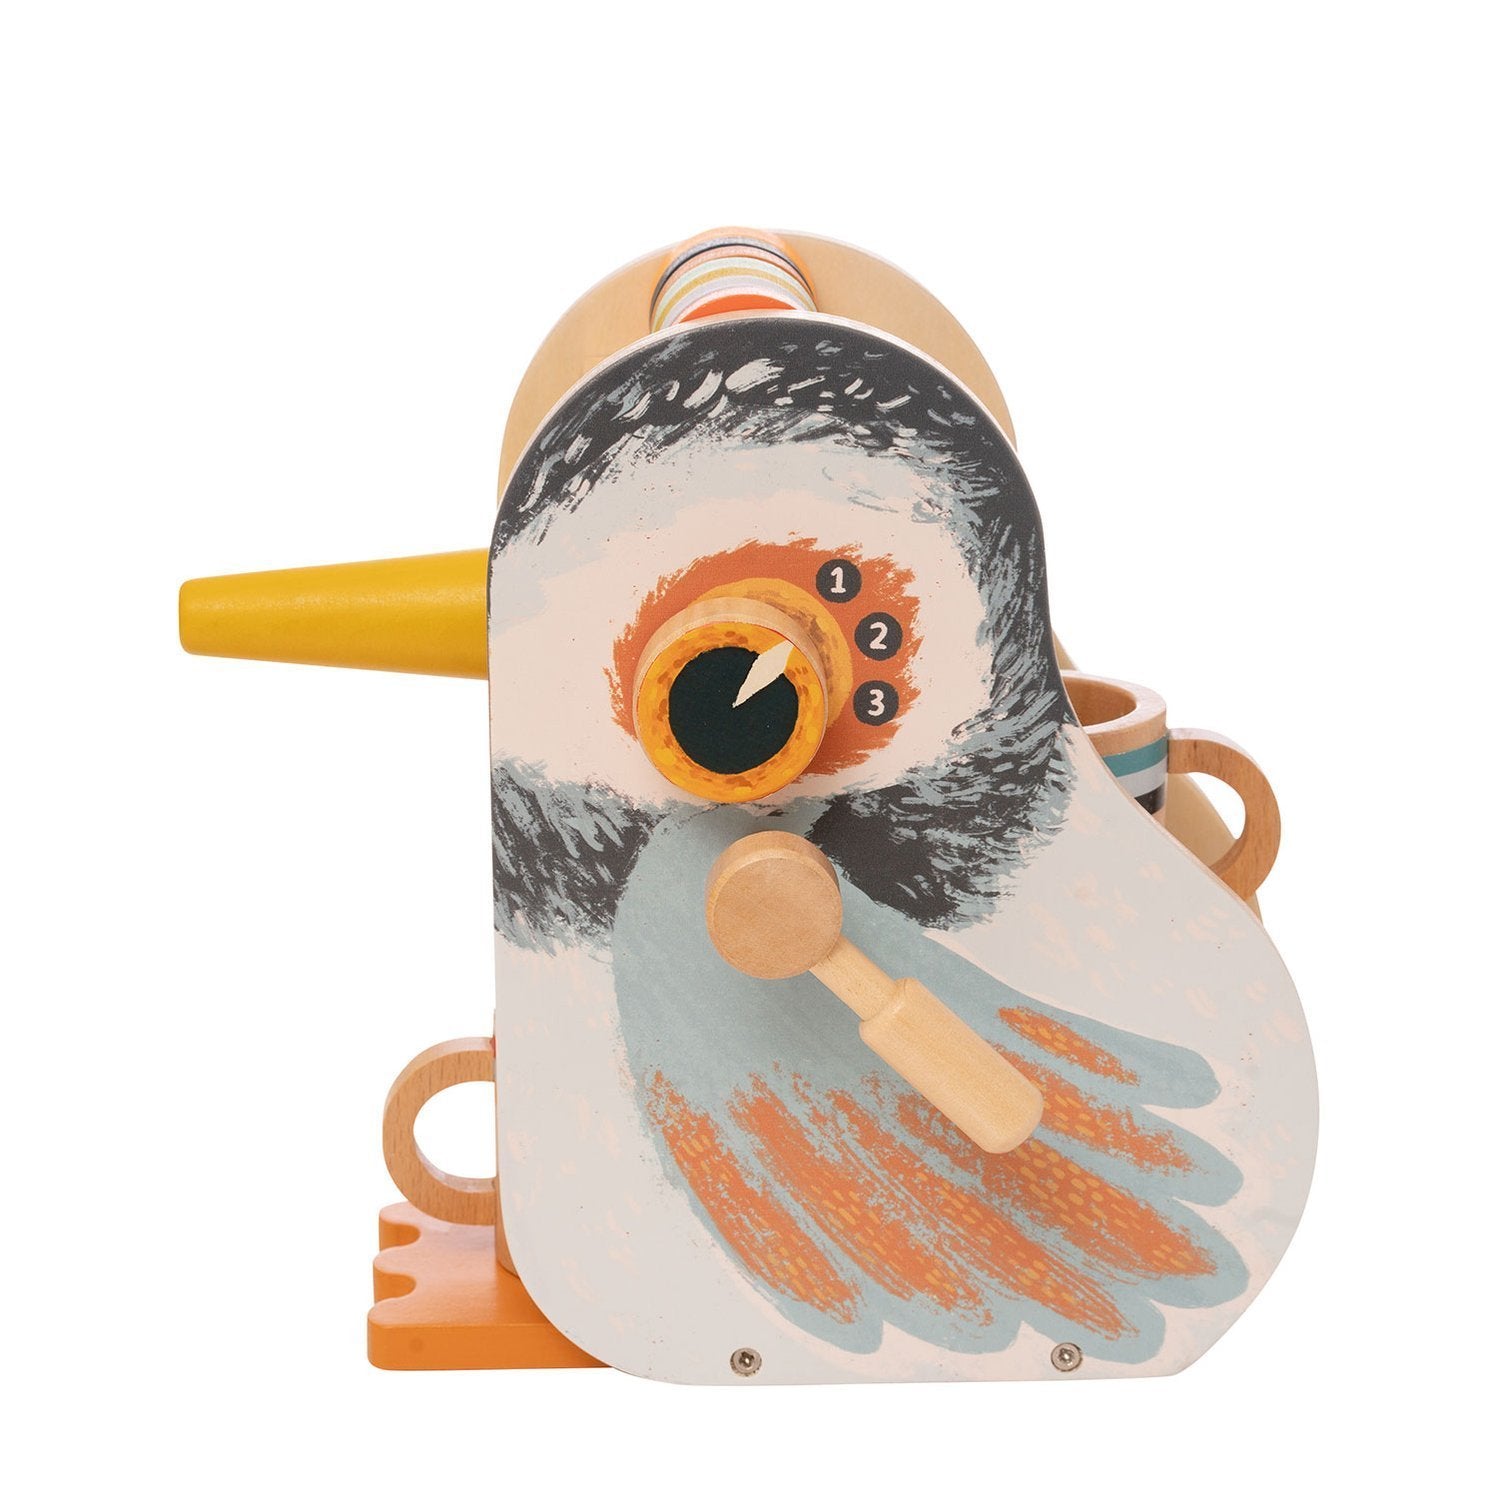 Early Bird Espresso by Manhattan Toy - Wood Wood Toys Canada's Favourite Montessori Toy Store